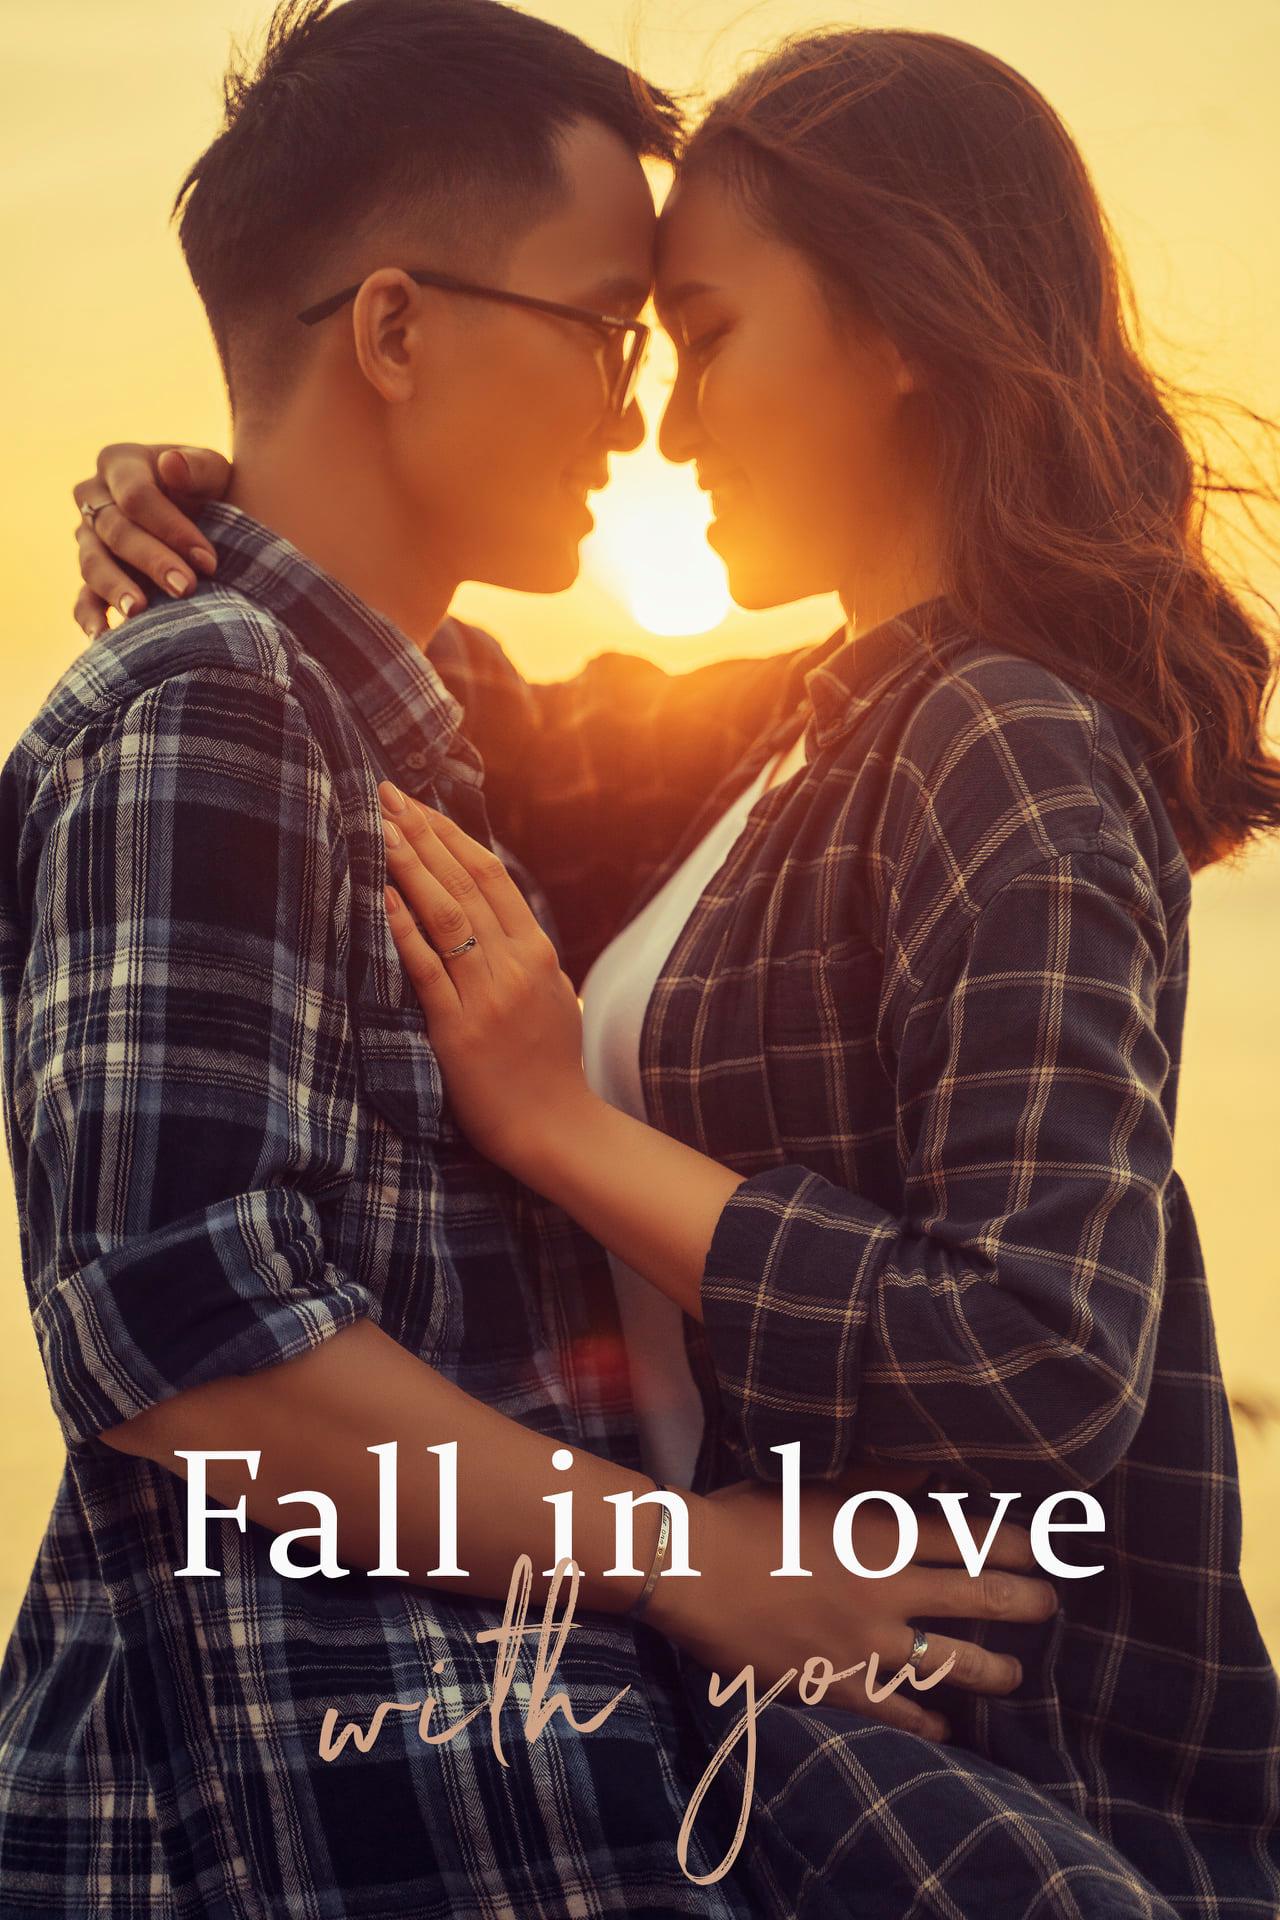 FALL IN LOVE WITH YOU | PHƯƠNG & MAI